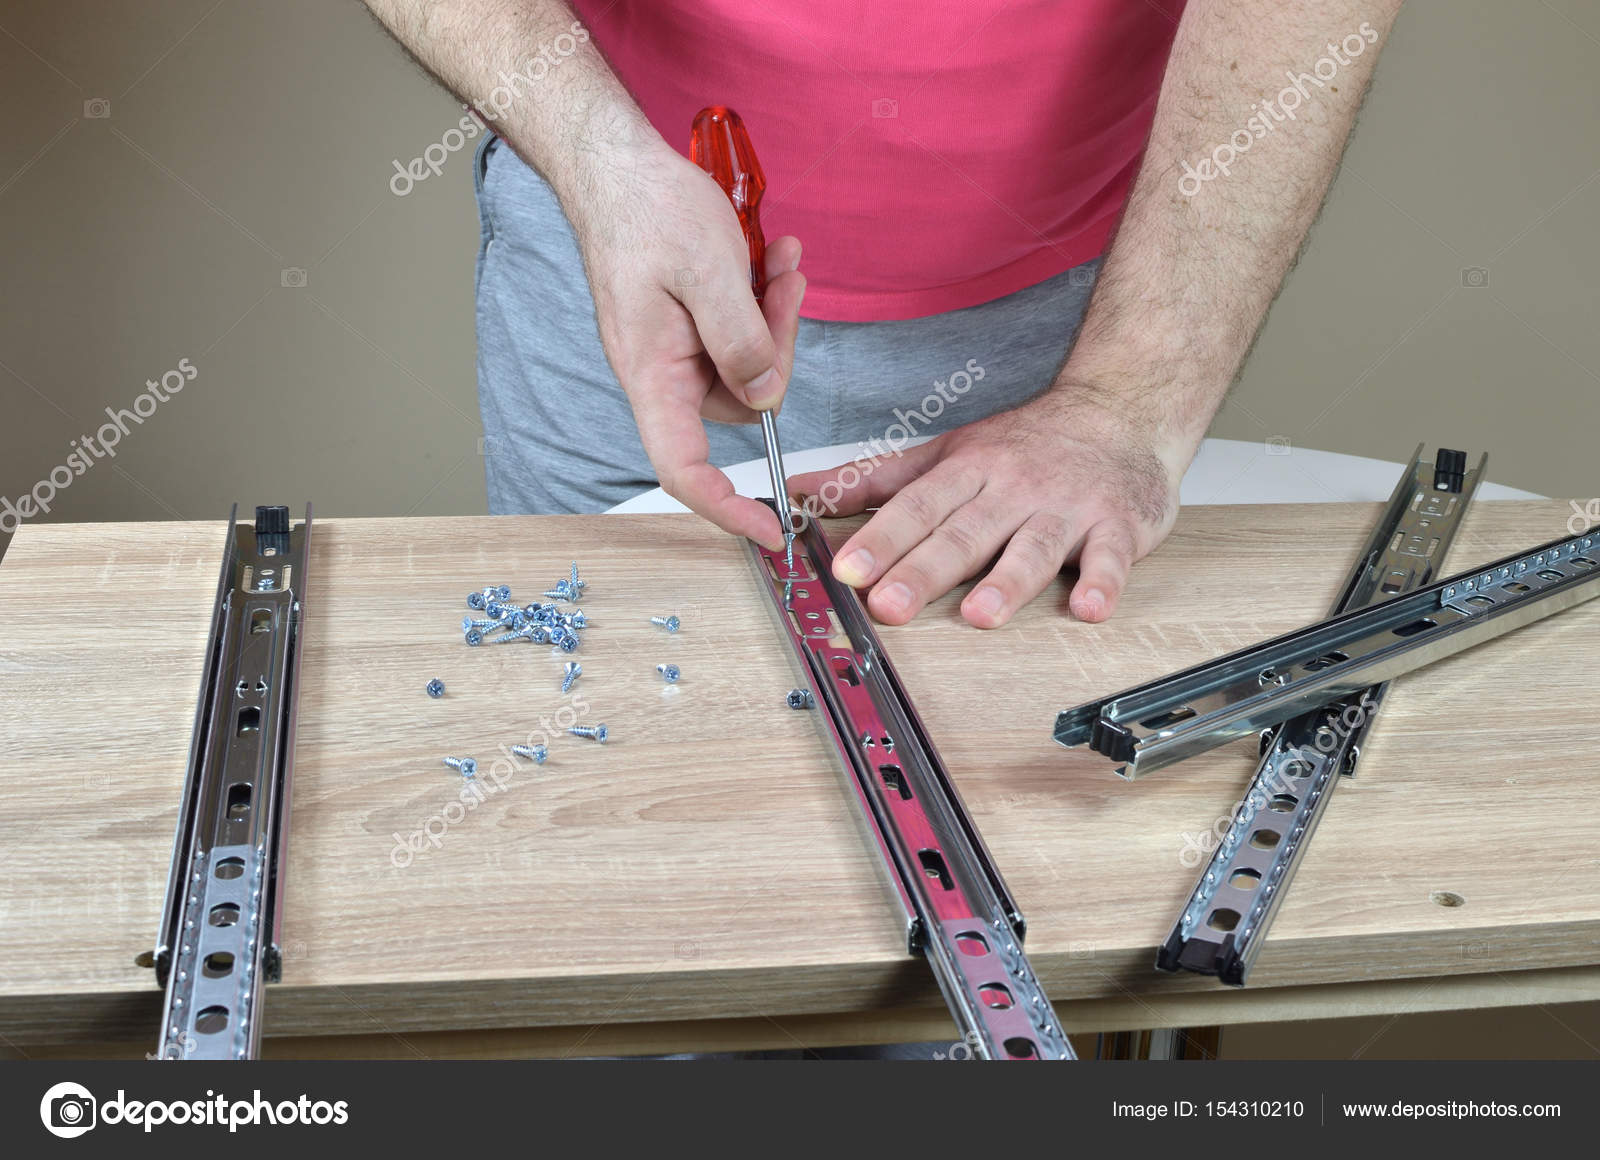 Installing A Drawer Slides On A Cabinet Stock Photo C Bane M